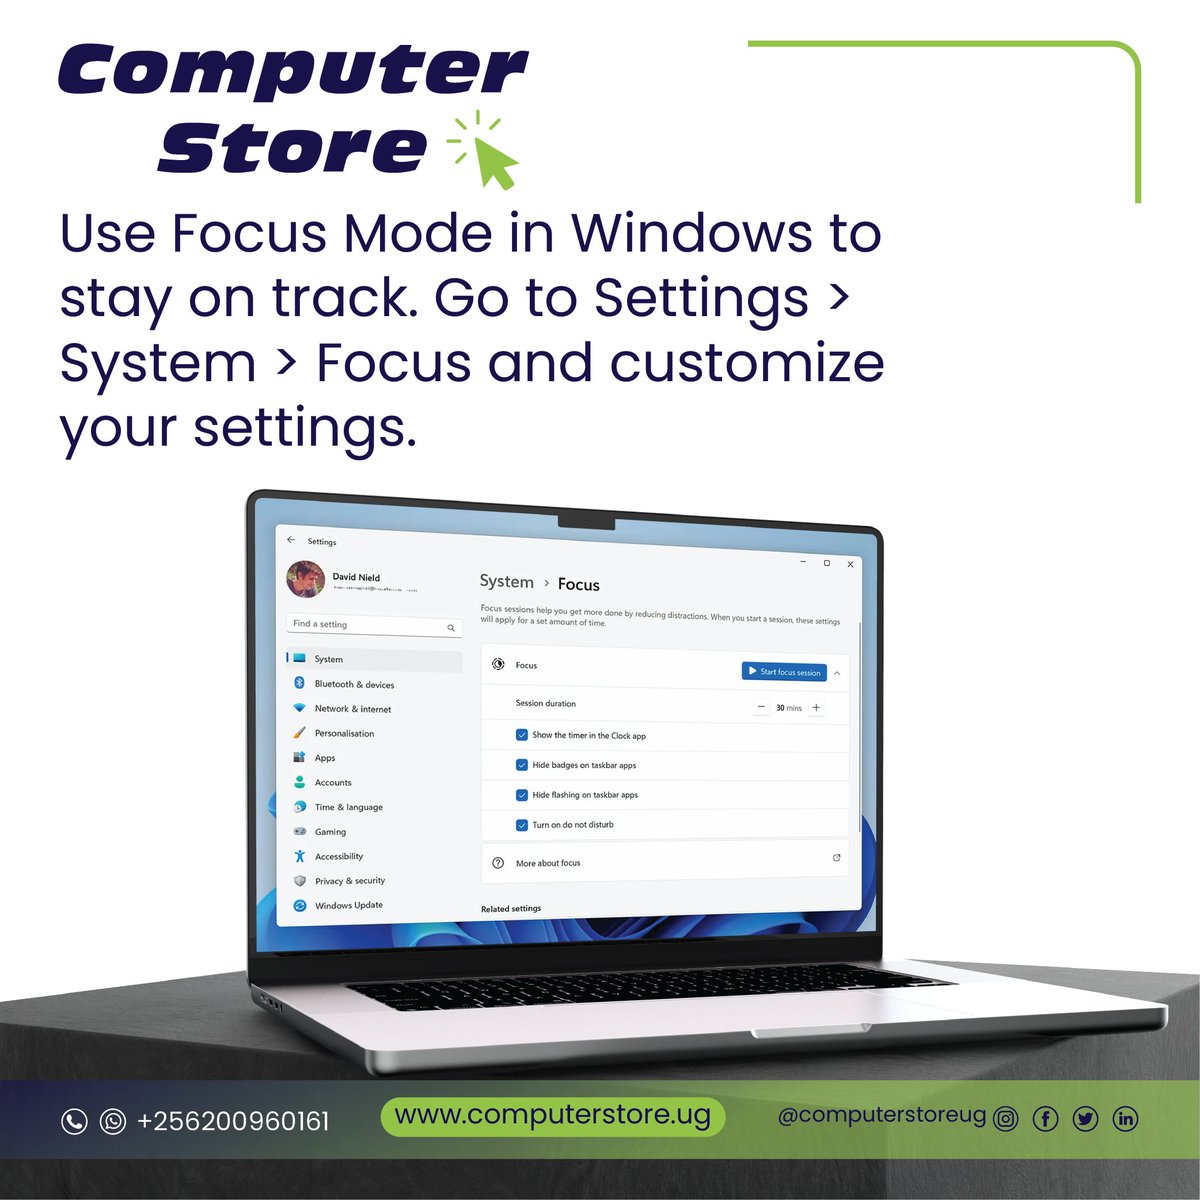 Have trouble staying focused on your tasks? Consider using the Focus Mode feature in Windows to help you power through!

Head to Settings > System > Focus. Here, you can customize your focus mode from muting notifications to setting timers.
#NextGenerationITSolutions